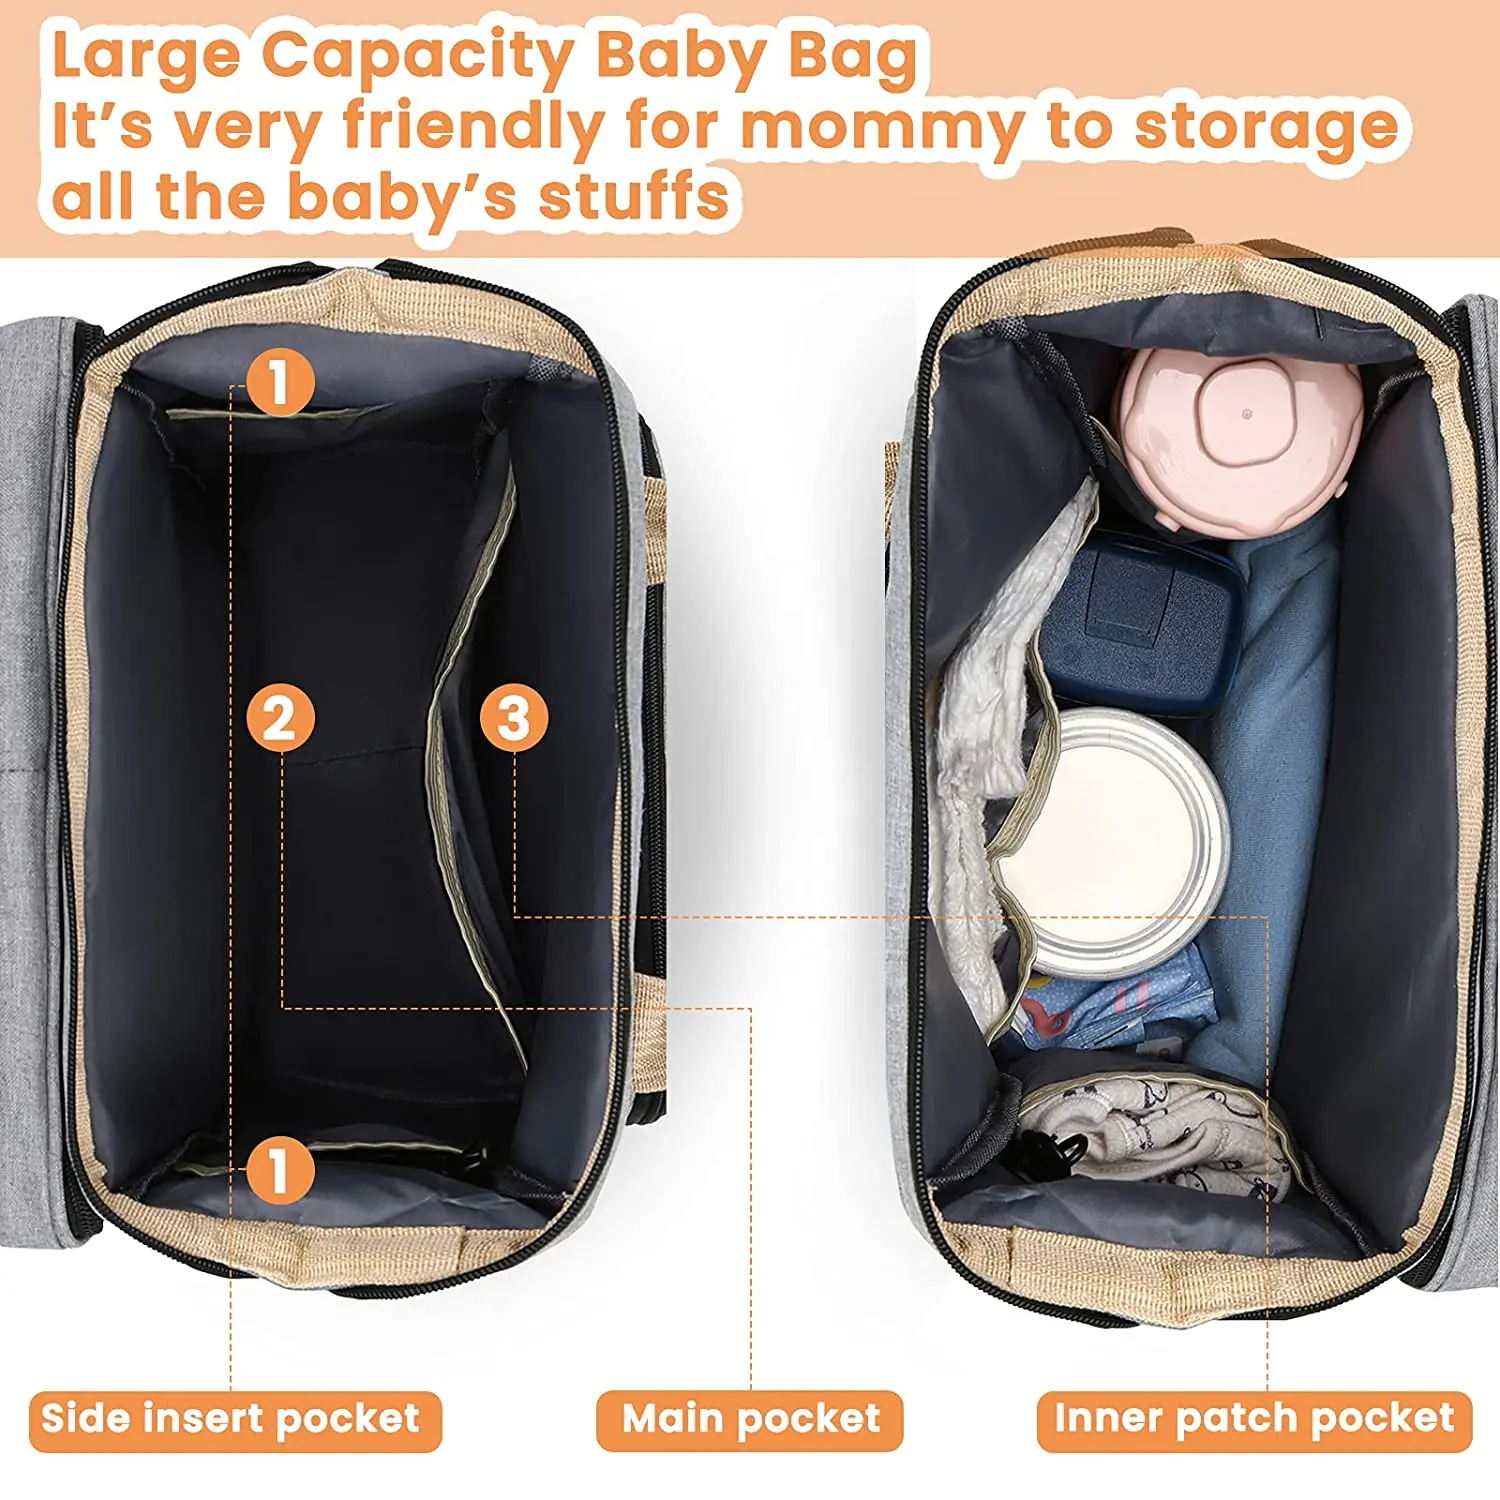 DreamNest Portable Travel Crib - Compact Baby Bed for On-the-Go Comfort